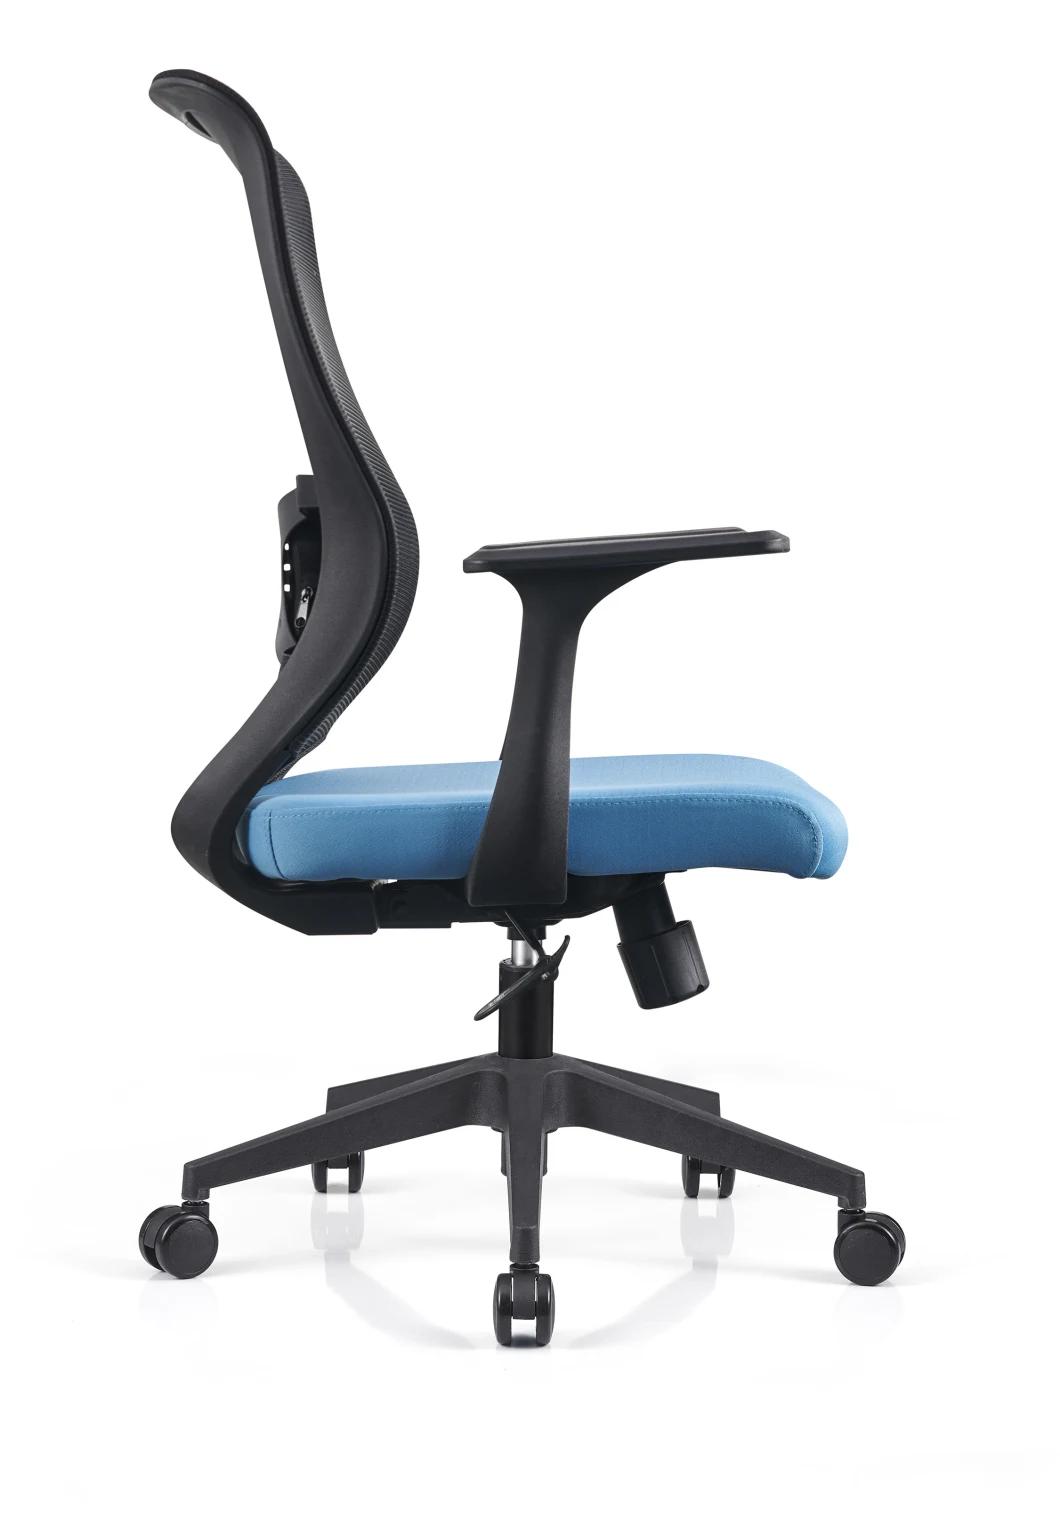 2021 New Functional Executive Manager Mesh Office Gaming Chair High Back with Adjustable Armrest